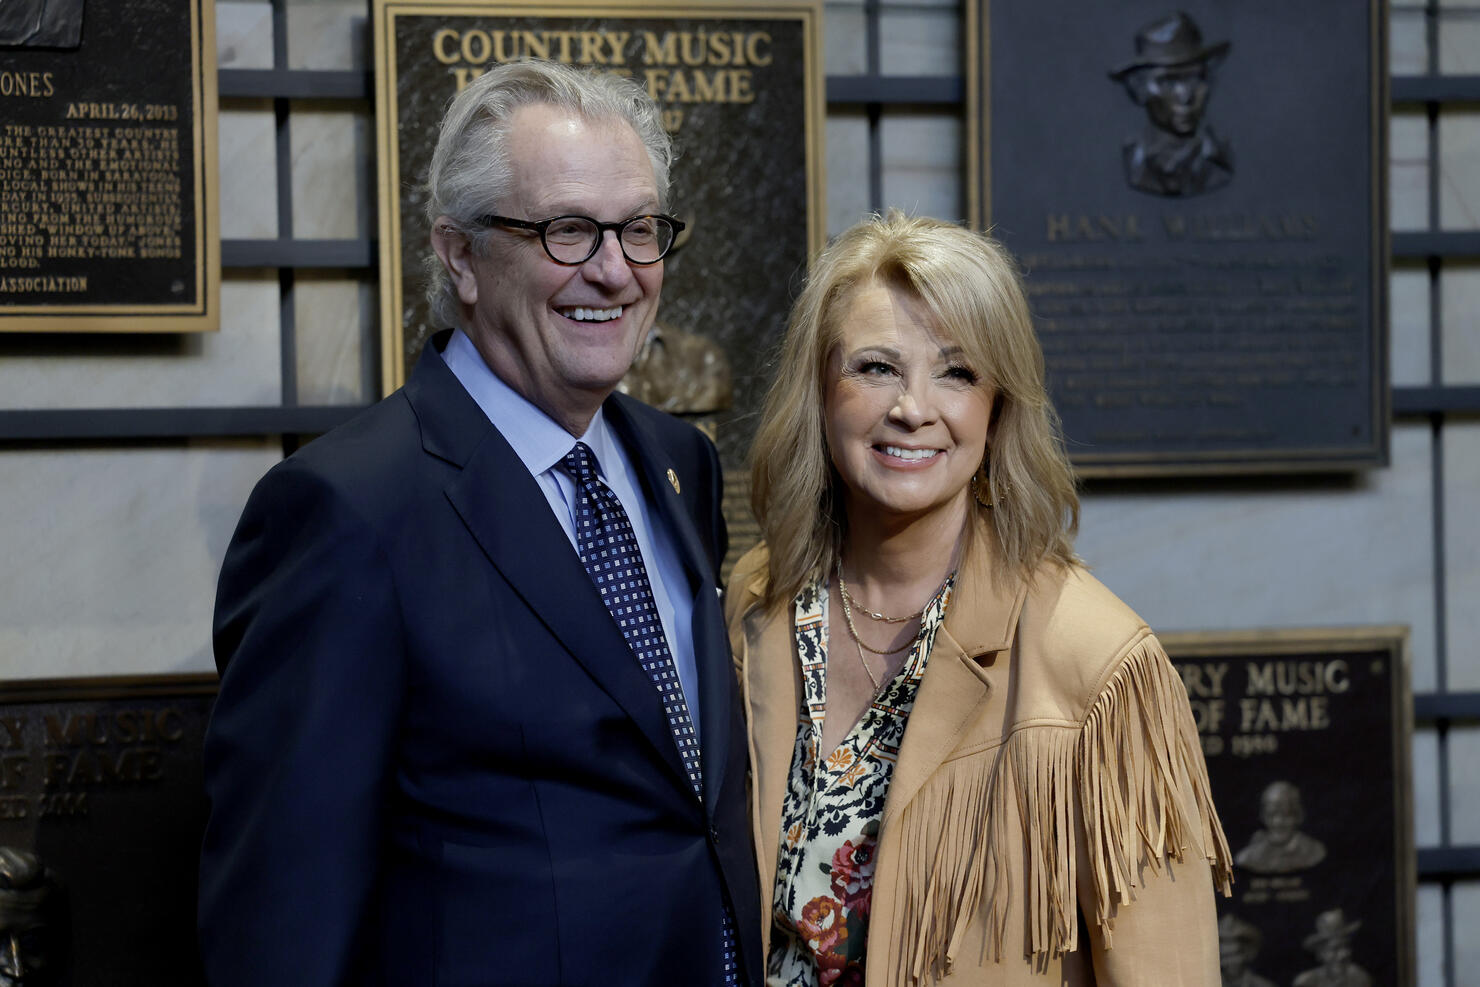 Country Music Hall of Fame and Museum Opens Patty Loveless: No Trouble with the Truth